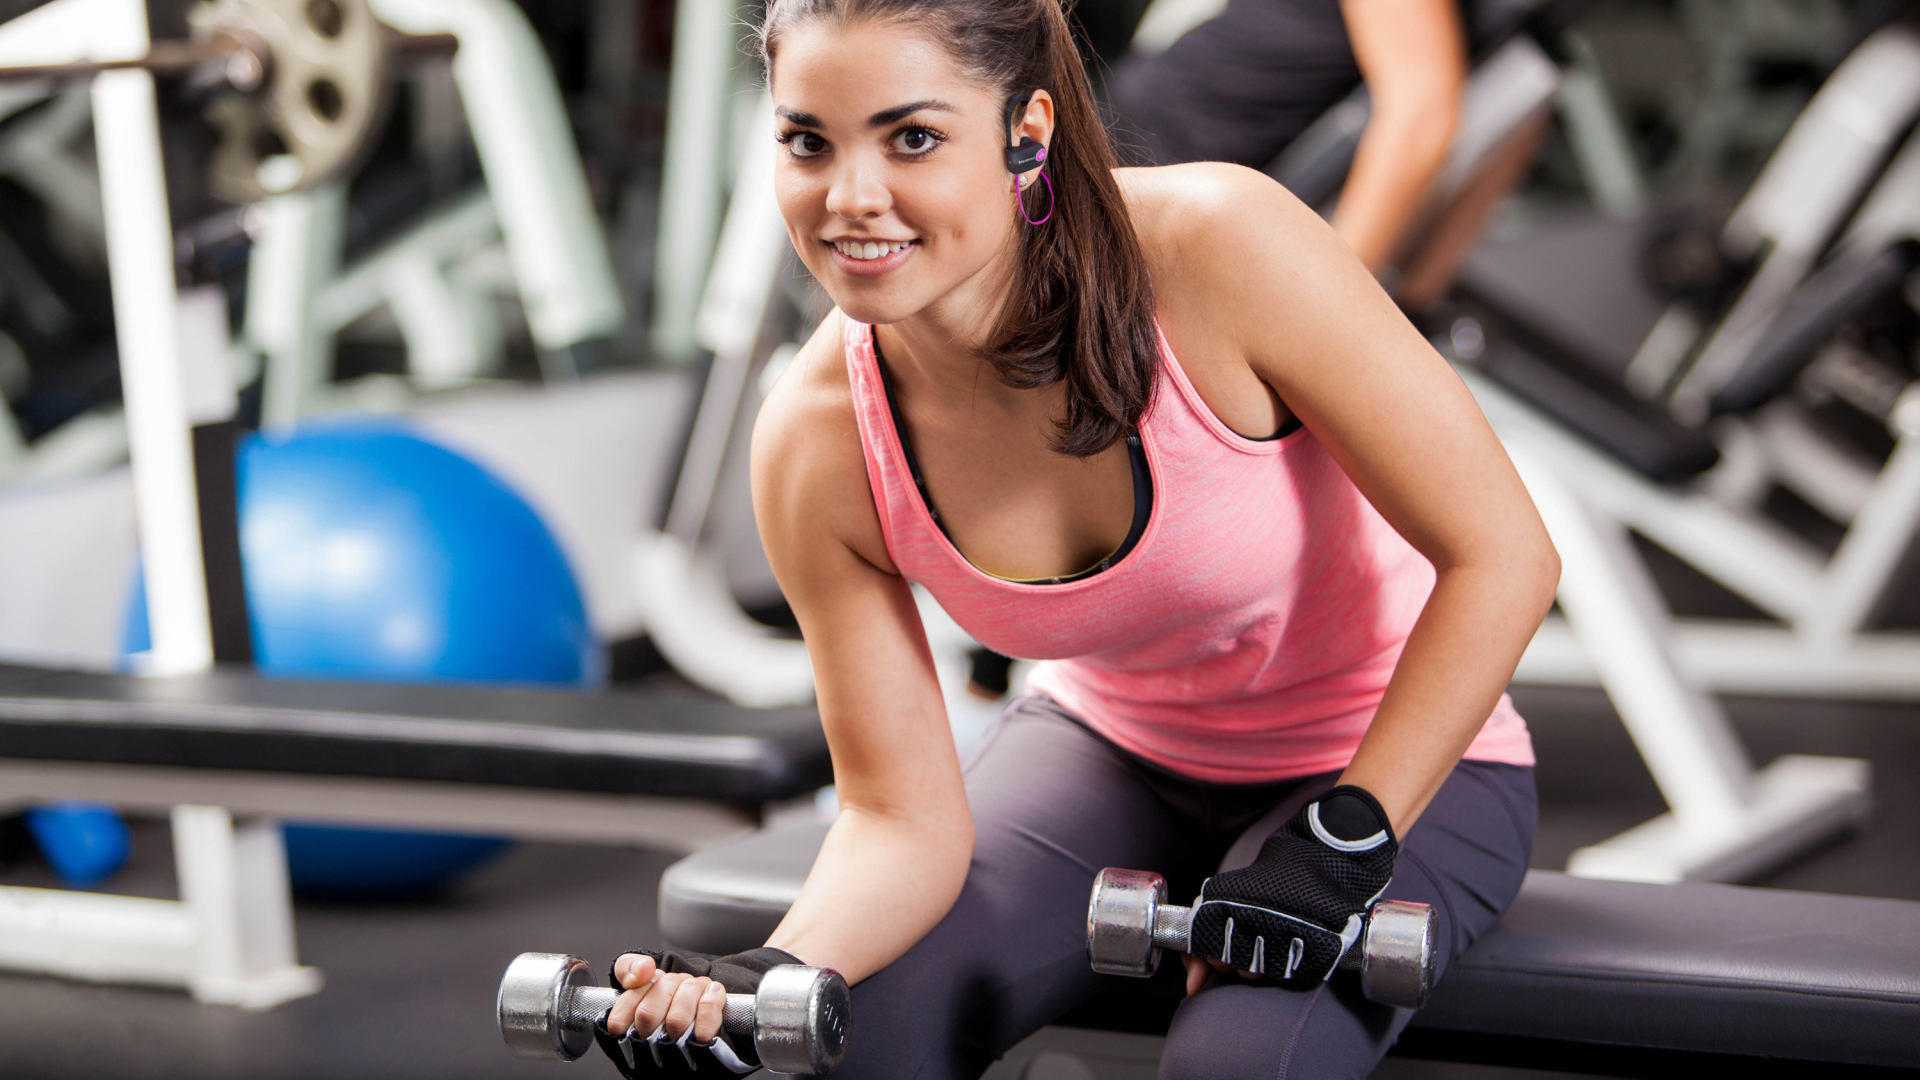 What Are the Benefits of Having a Separate Ladies Section in the Gym?